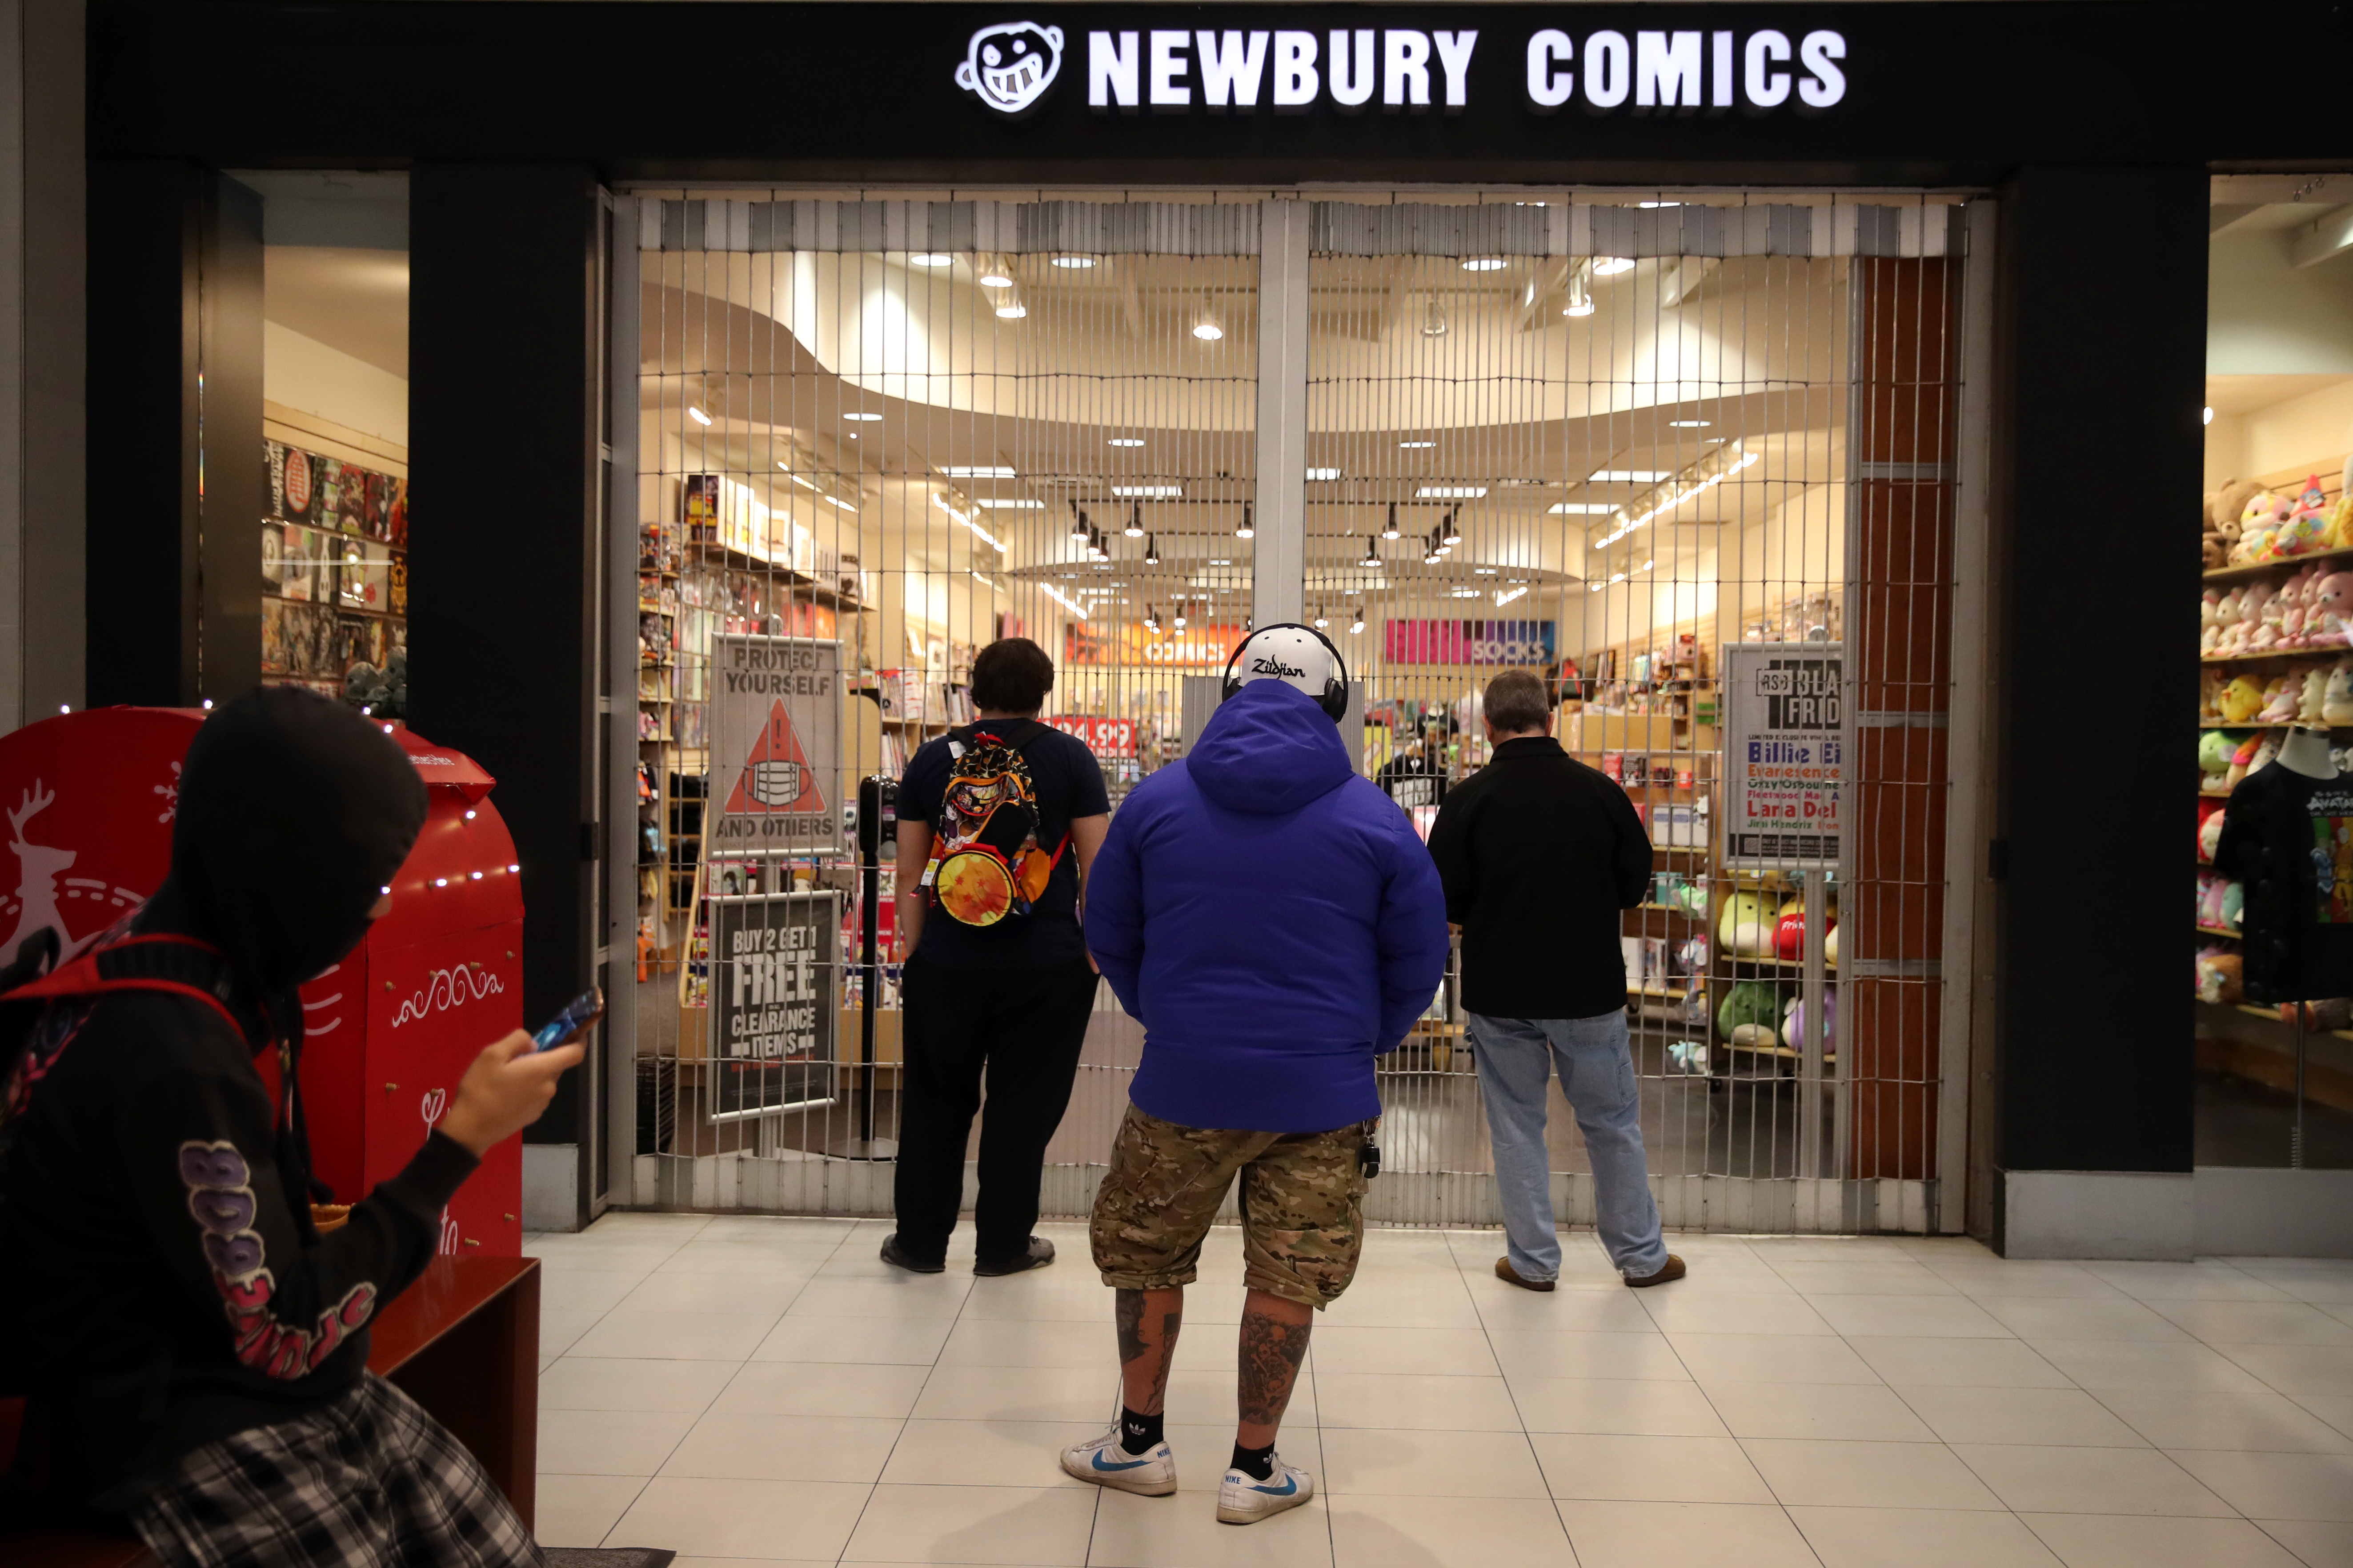 Shoppers wait for Newbury Comics to open on Black Friday.